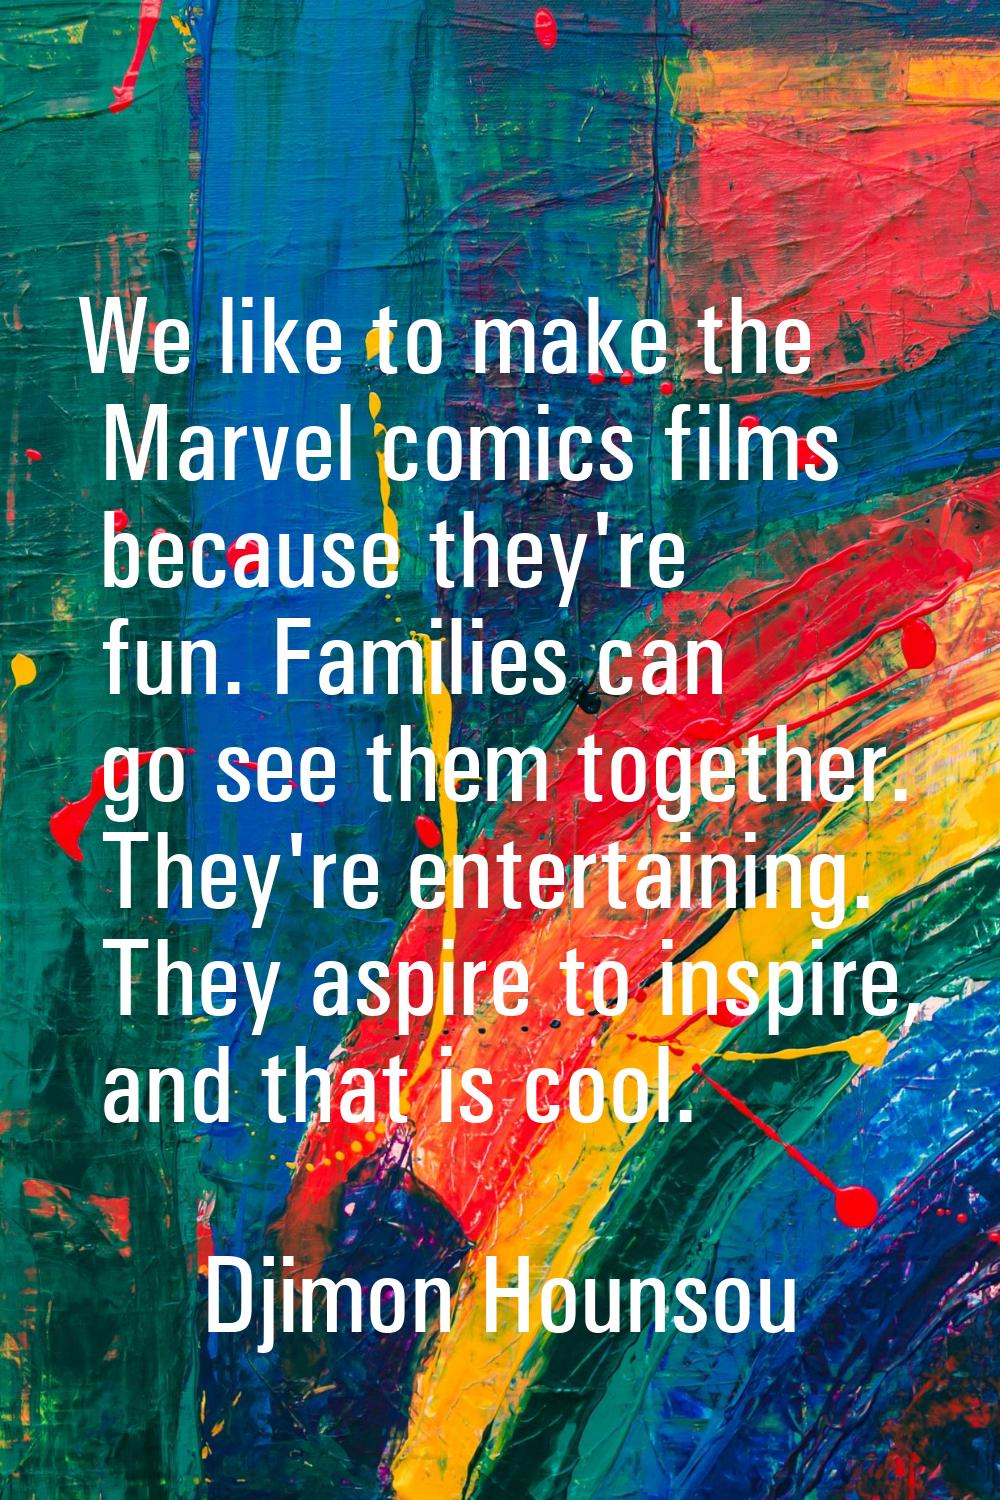 We like to make the Marvel comics films because they're fun. Families can go see them together. The